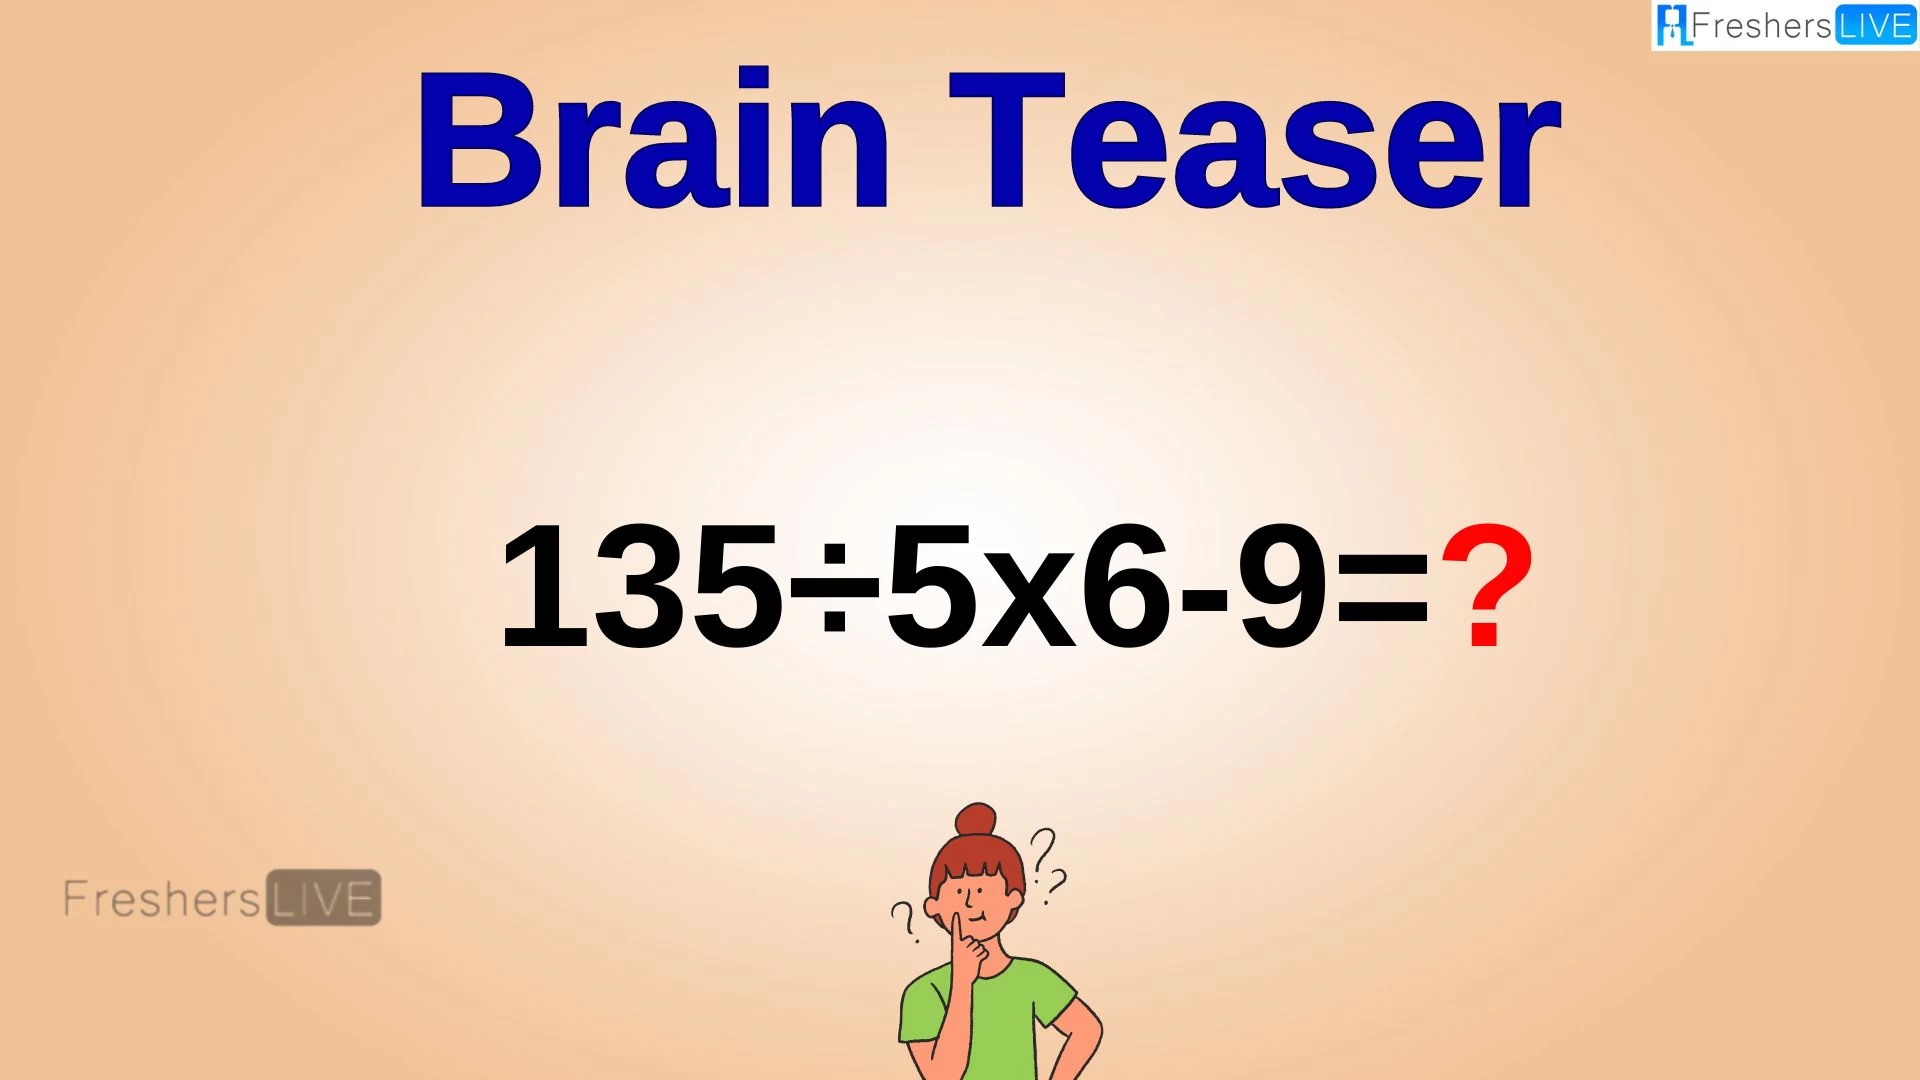 Can You Solve this Math Problem? Evaluate 135÷5x6-9